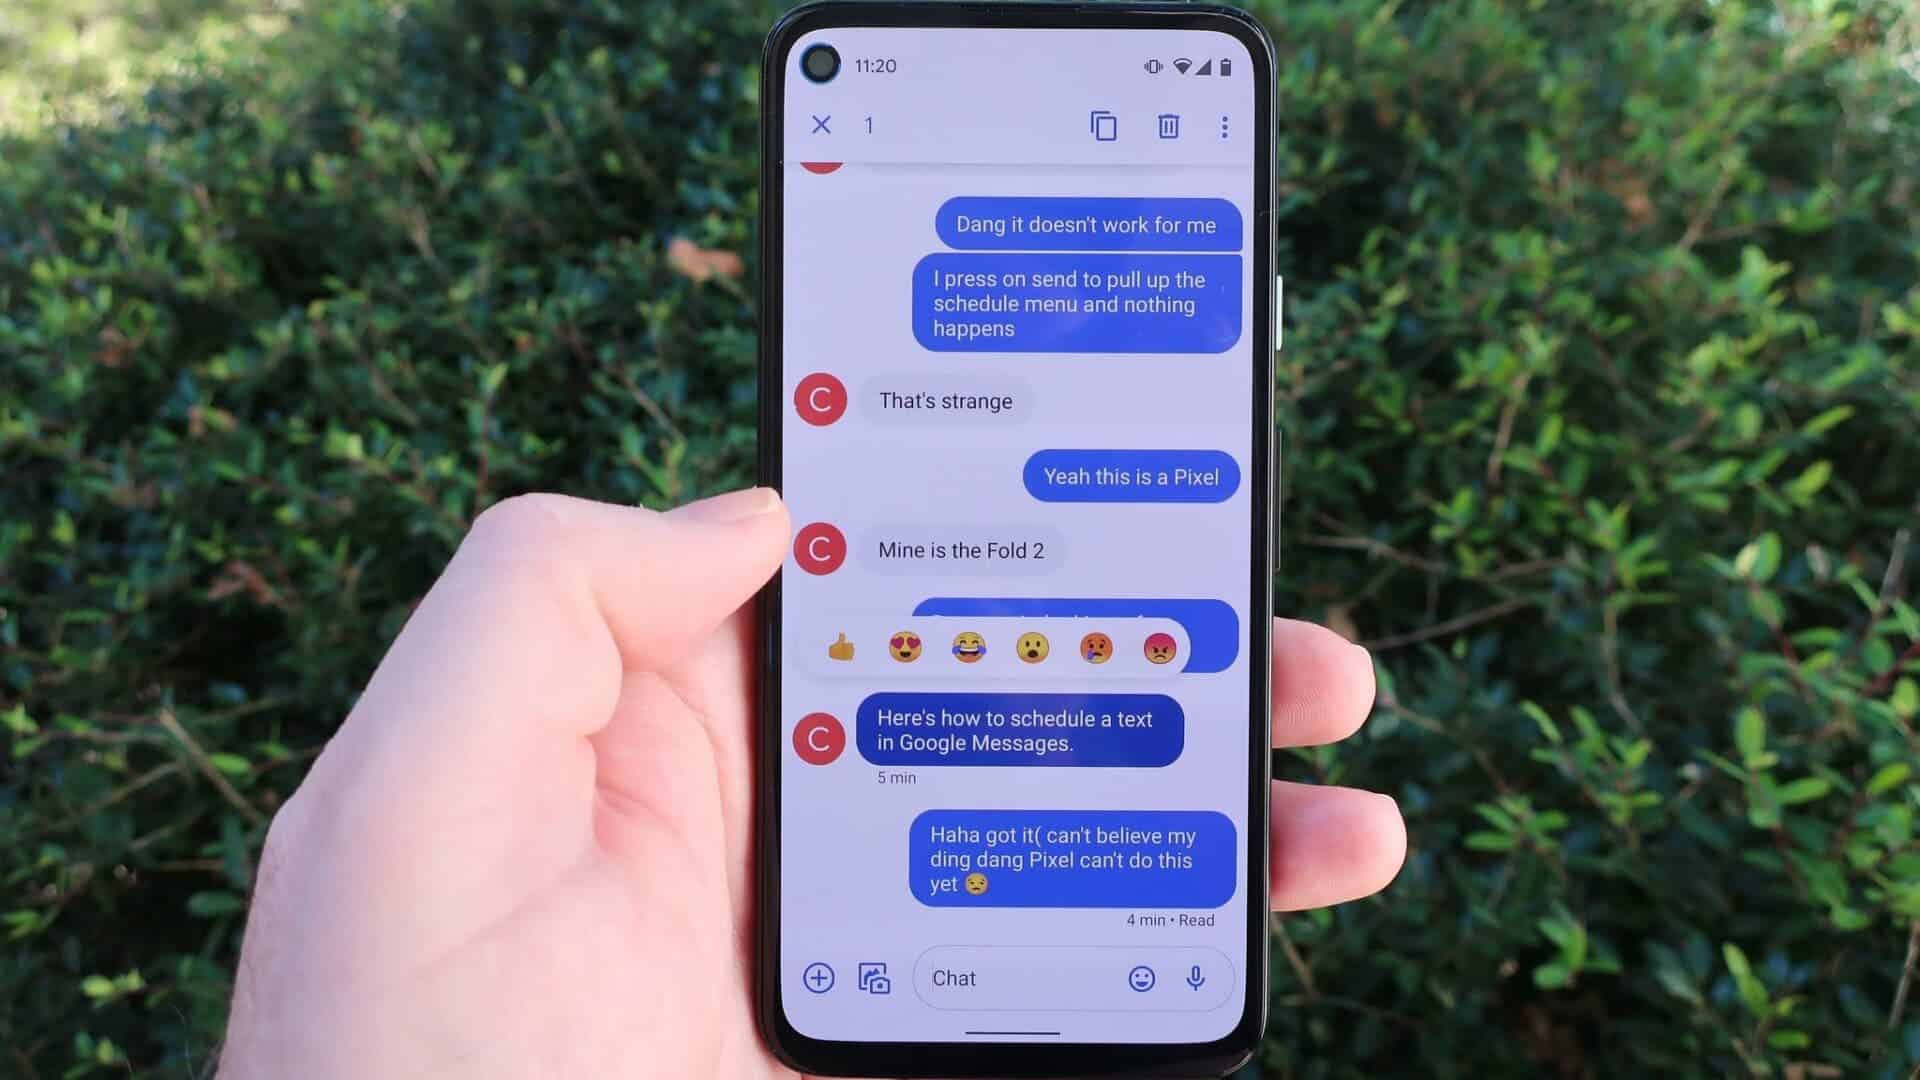 Google Messages is now the new name of the RCS messaging platform